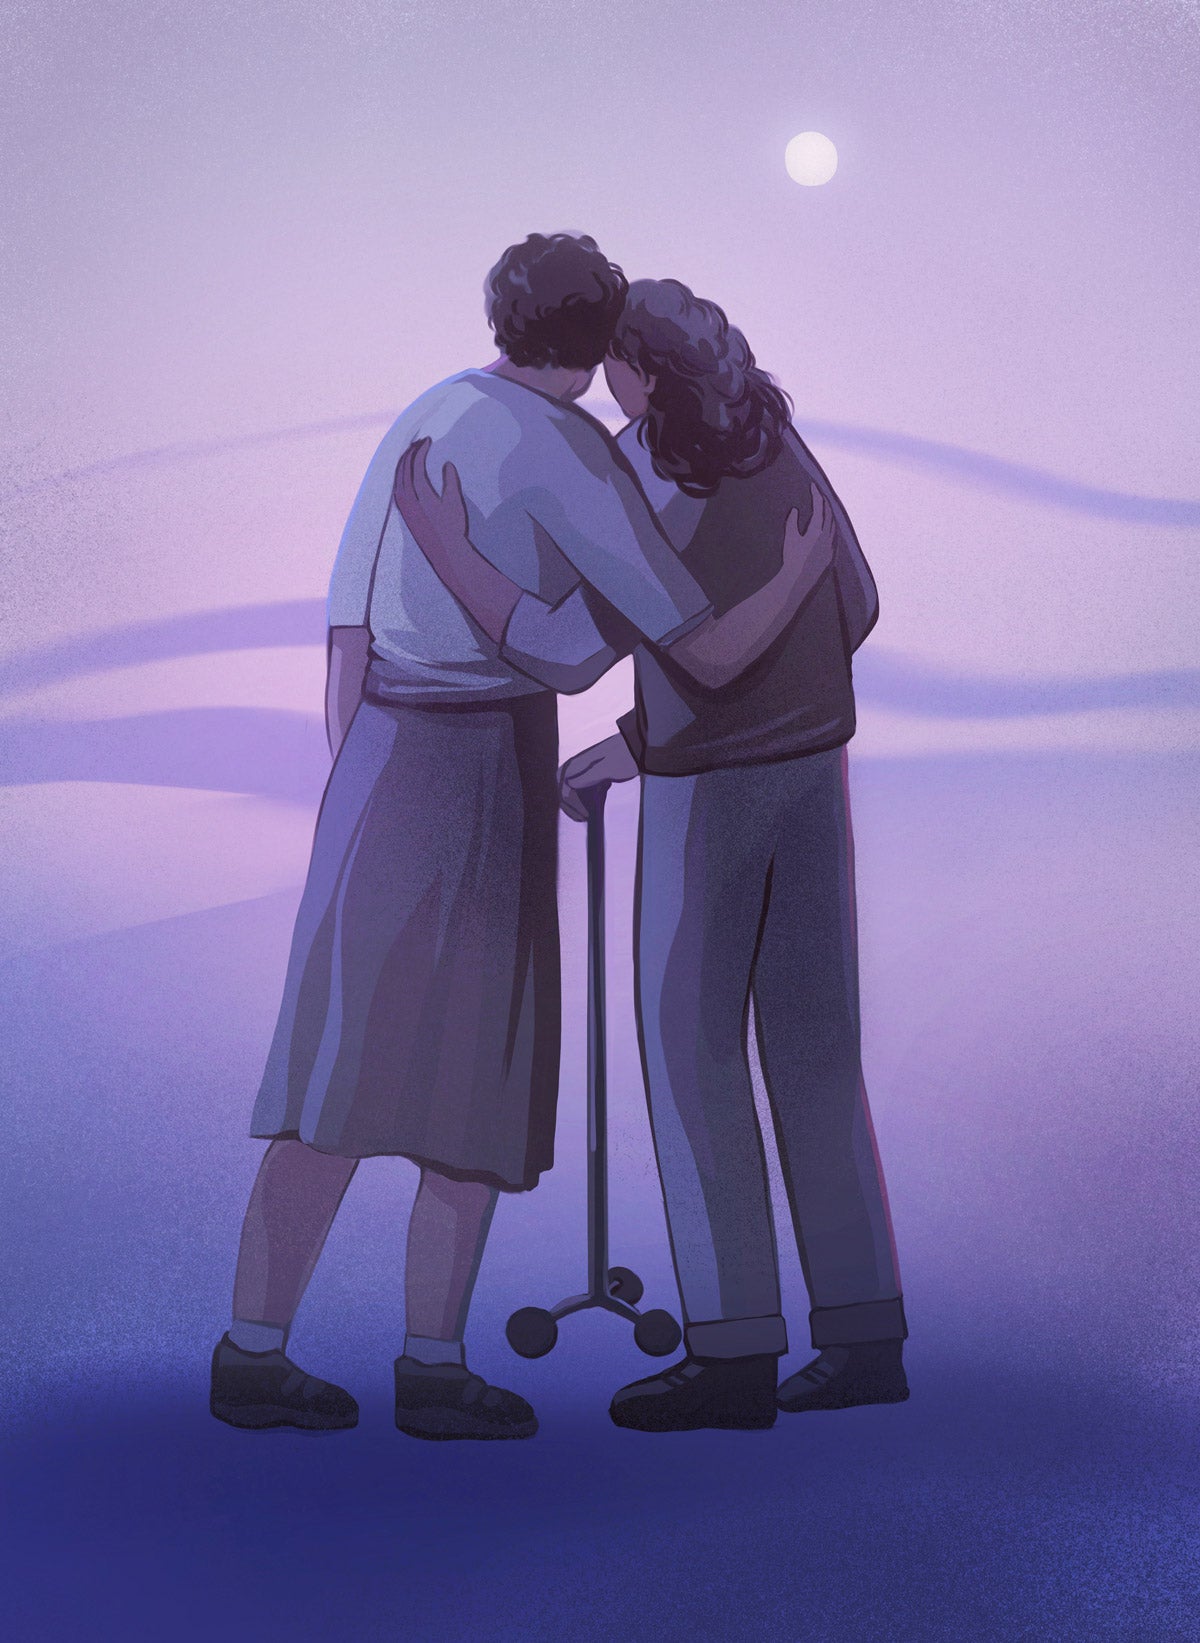 Illustration: Two female figures with their back toward the viewer embrace in a side hug. The figure on the right has a cane. The composition is shades of purple in a non-descript scene. A white full moon glows in the top right.